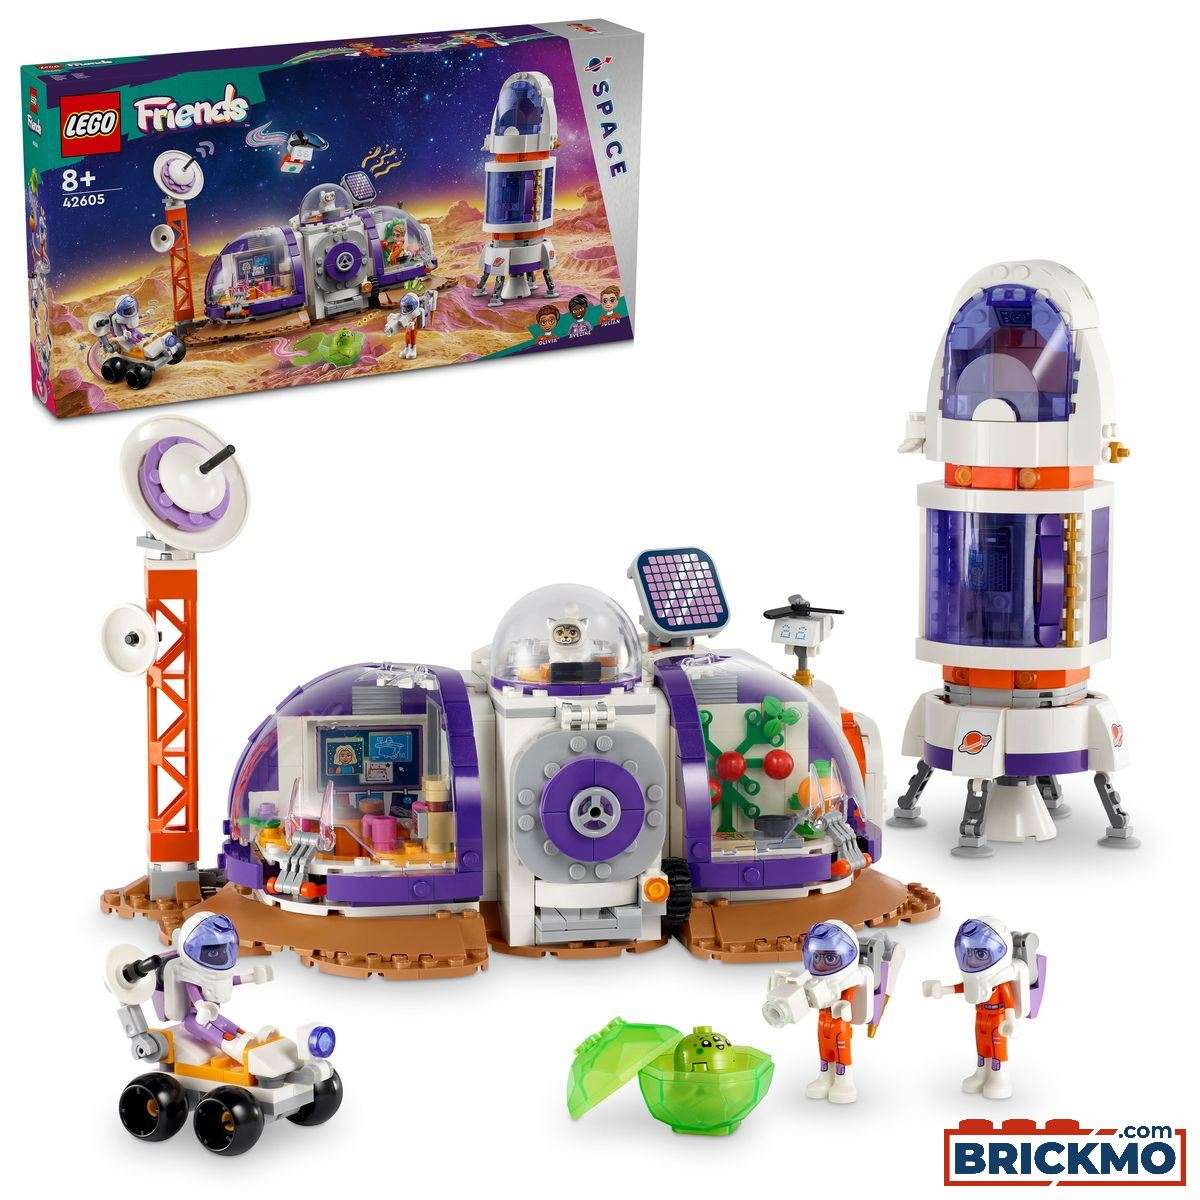 LEGO Friends 42605 Mars Space Base and Rocket 42605